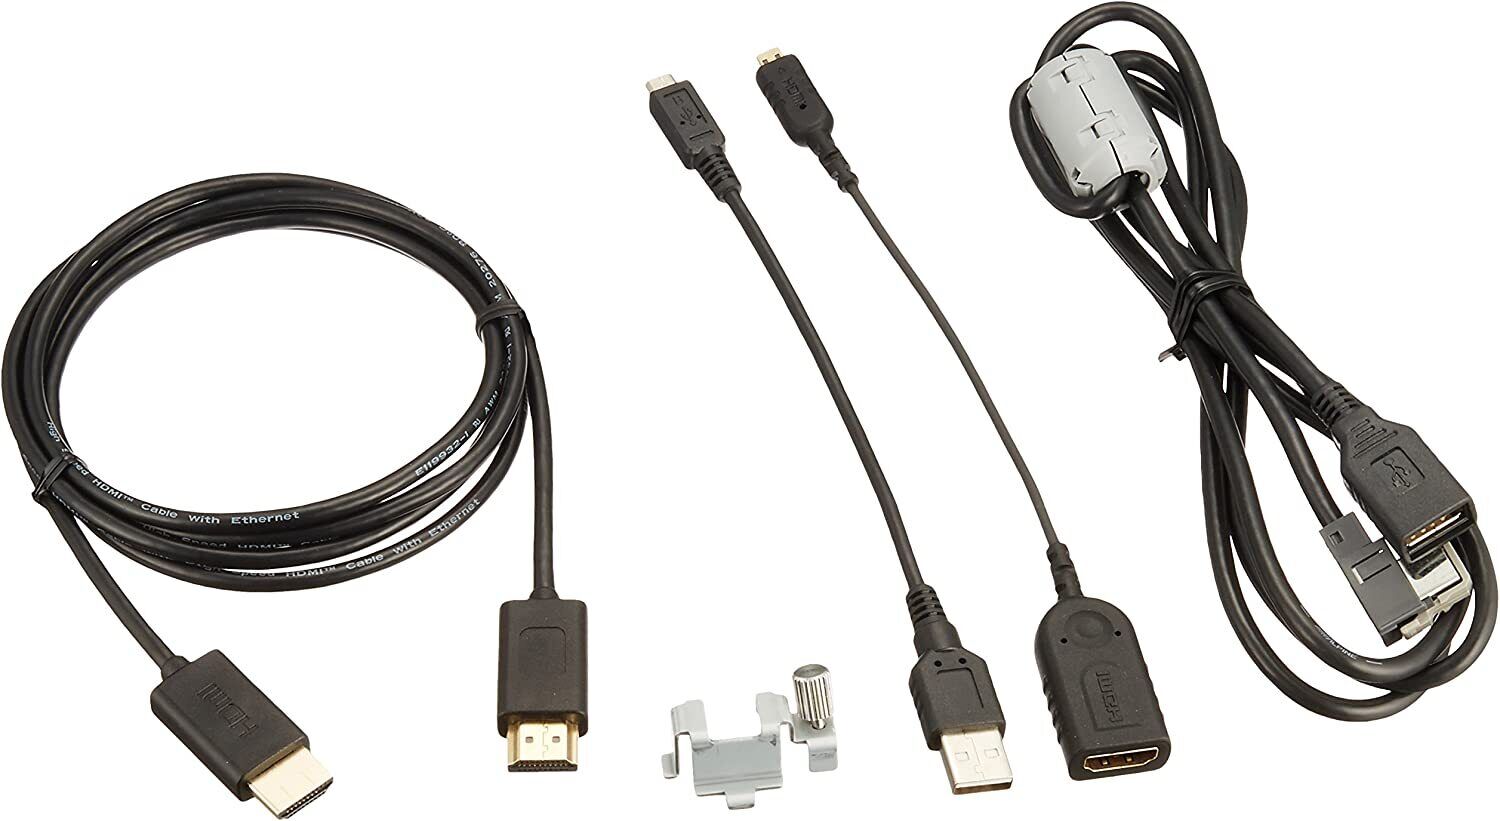 Alpine KCU-610HD HDMI cable kit for connecting smartphones to select Alpine rec